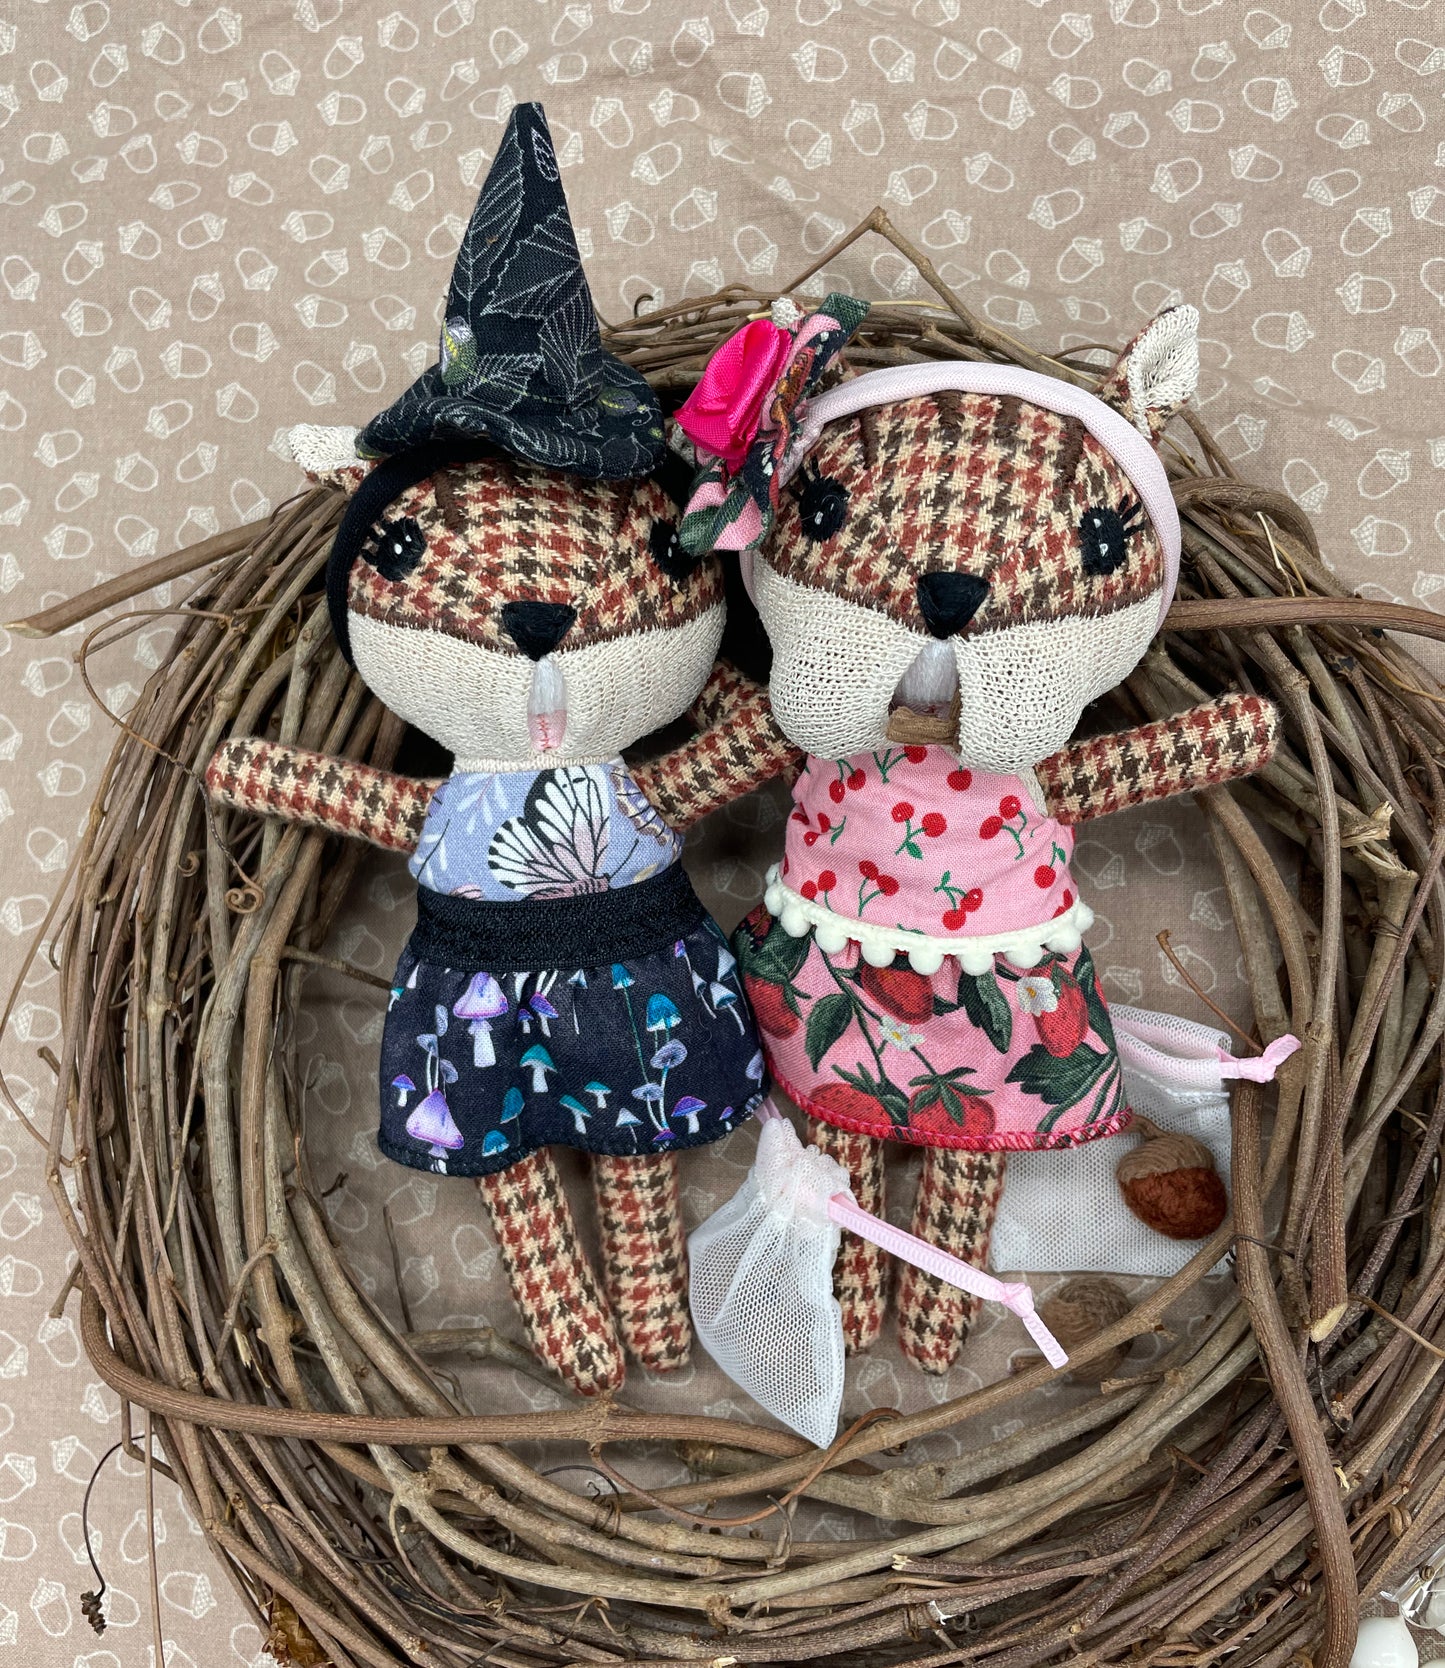 Handmade Chipmunk Doll, Stuffed chipmunk, Reversible clothes, gift idea, gift for kids, Witch doll, witch, gift, plaid, cute doll